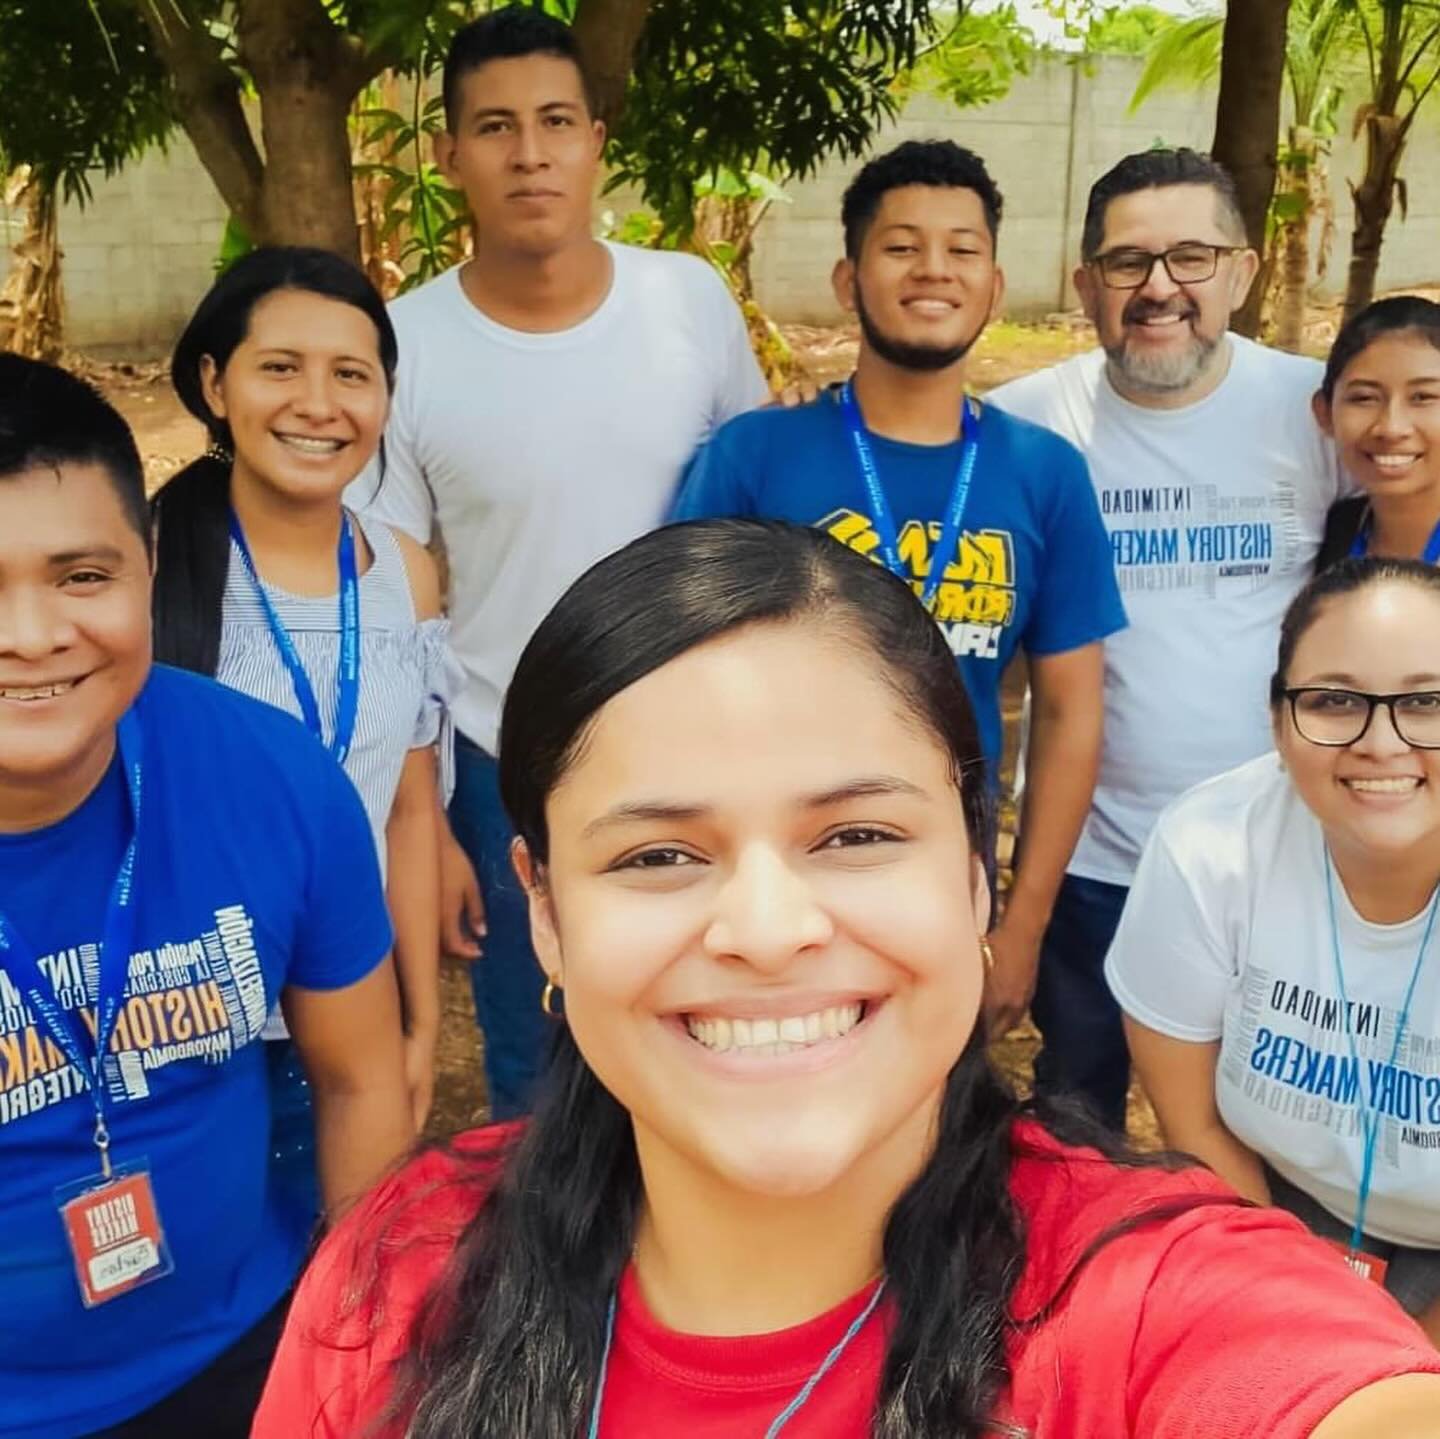 Congrats to the new ILI alumni from El Salvador 🇸🇻🎓🥳! These church and ministry leaders recently completed a transformational History Makers training where they were challenged, inspired and equipped to make an impact in their community and throu